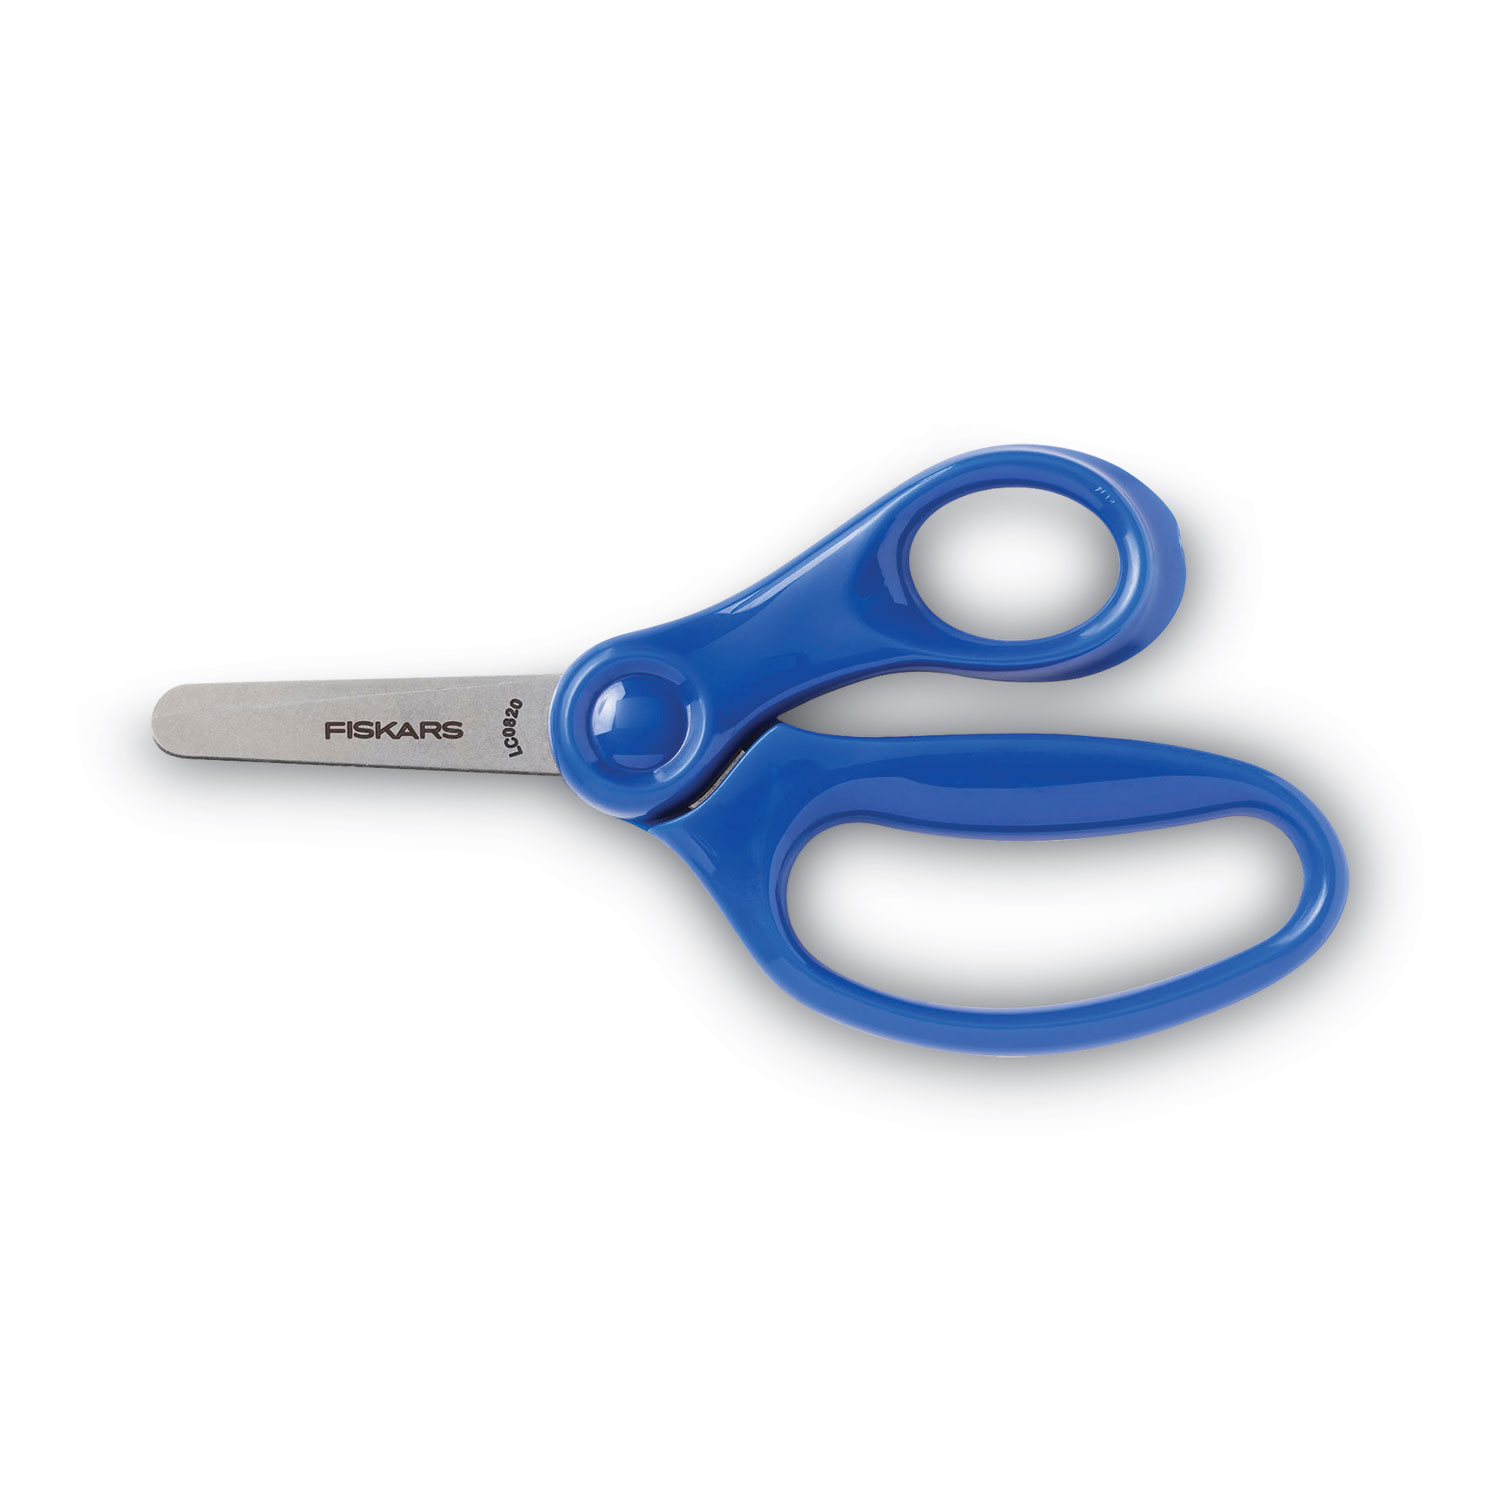 Kids/Student Scissors, Rounded Tip, 5